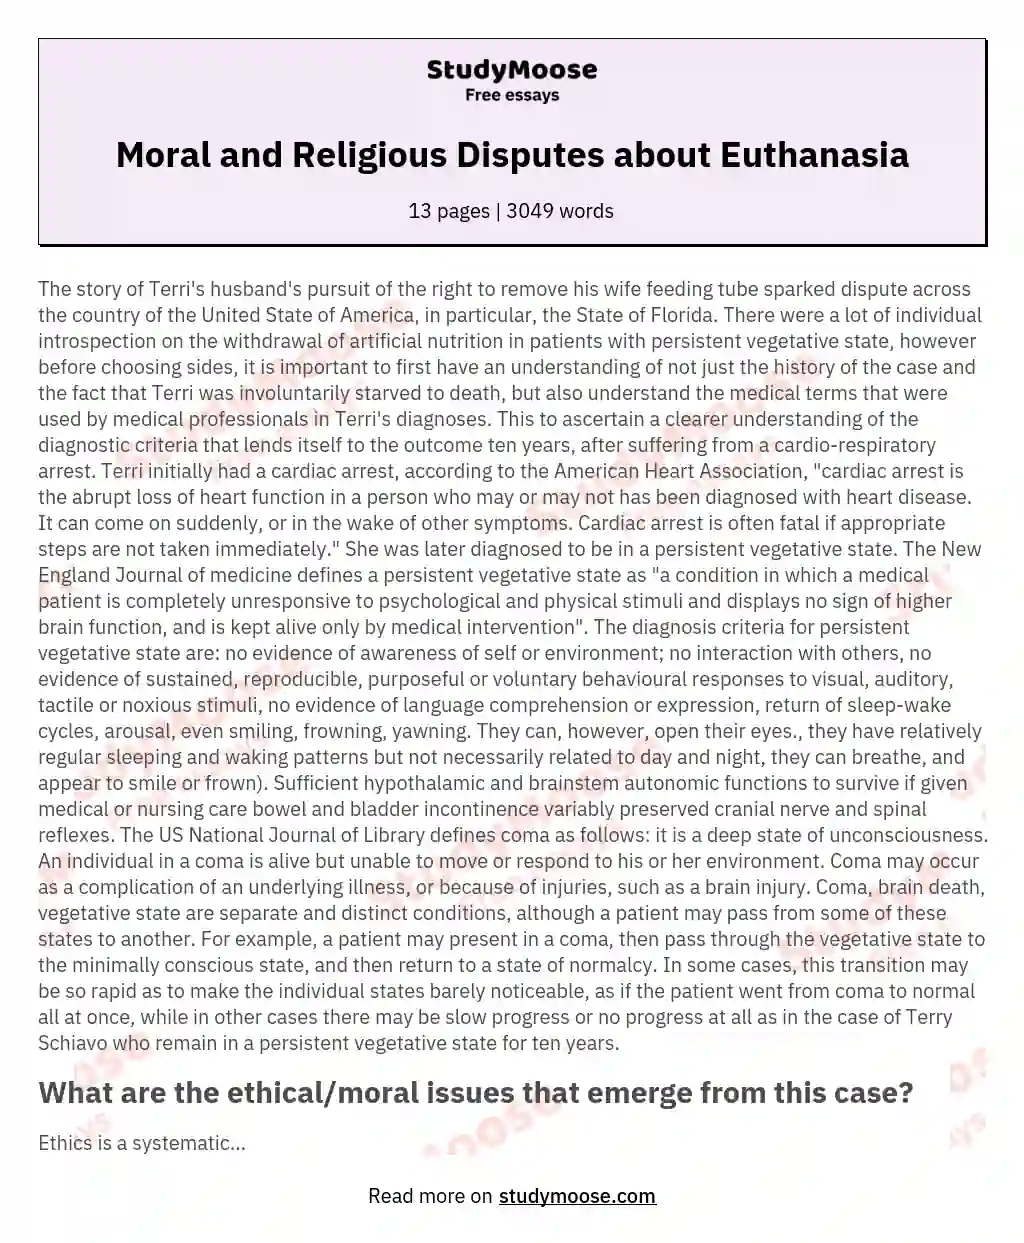 Moral and Religious Disputes about Euthanasia essay